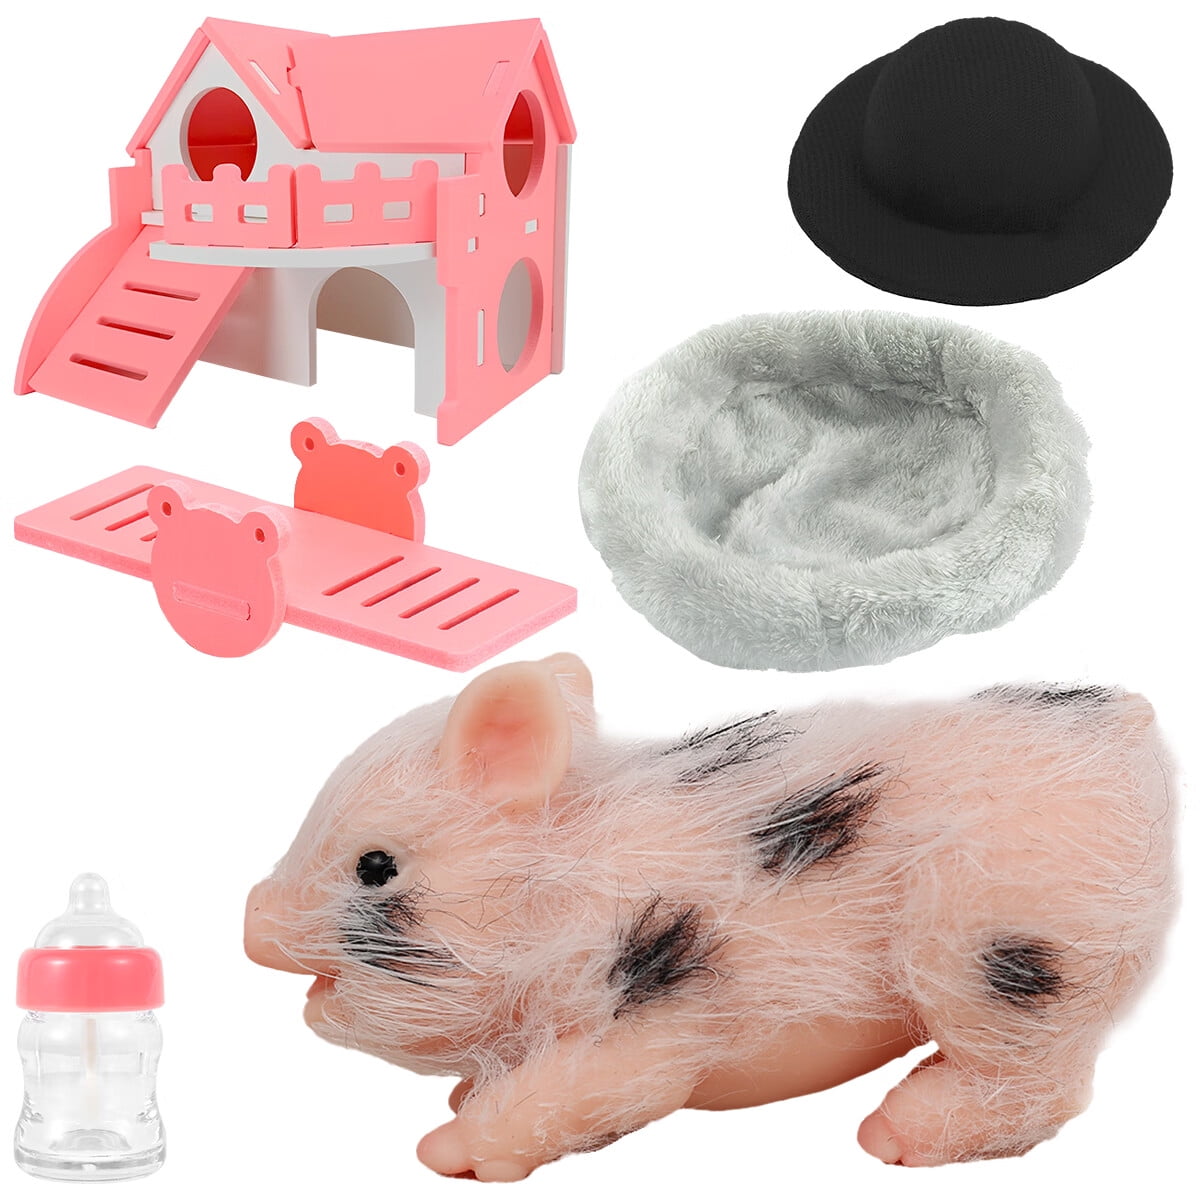 Willstar Silicone Pig Toy, 6 in Silicone Animals Pig Doll Mini Silicone Piglet Soft Touch Interesting Pig Toy Baby Gift, Size: 1pc